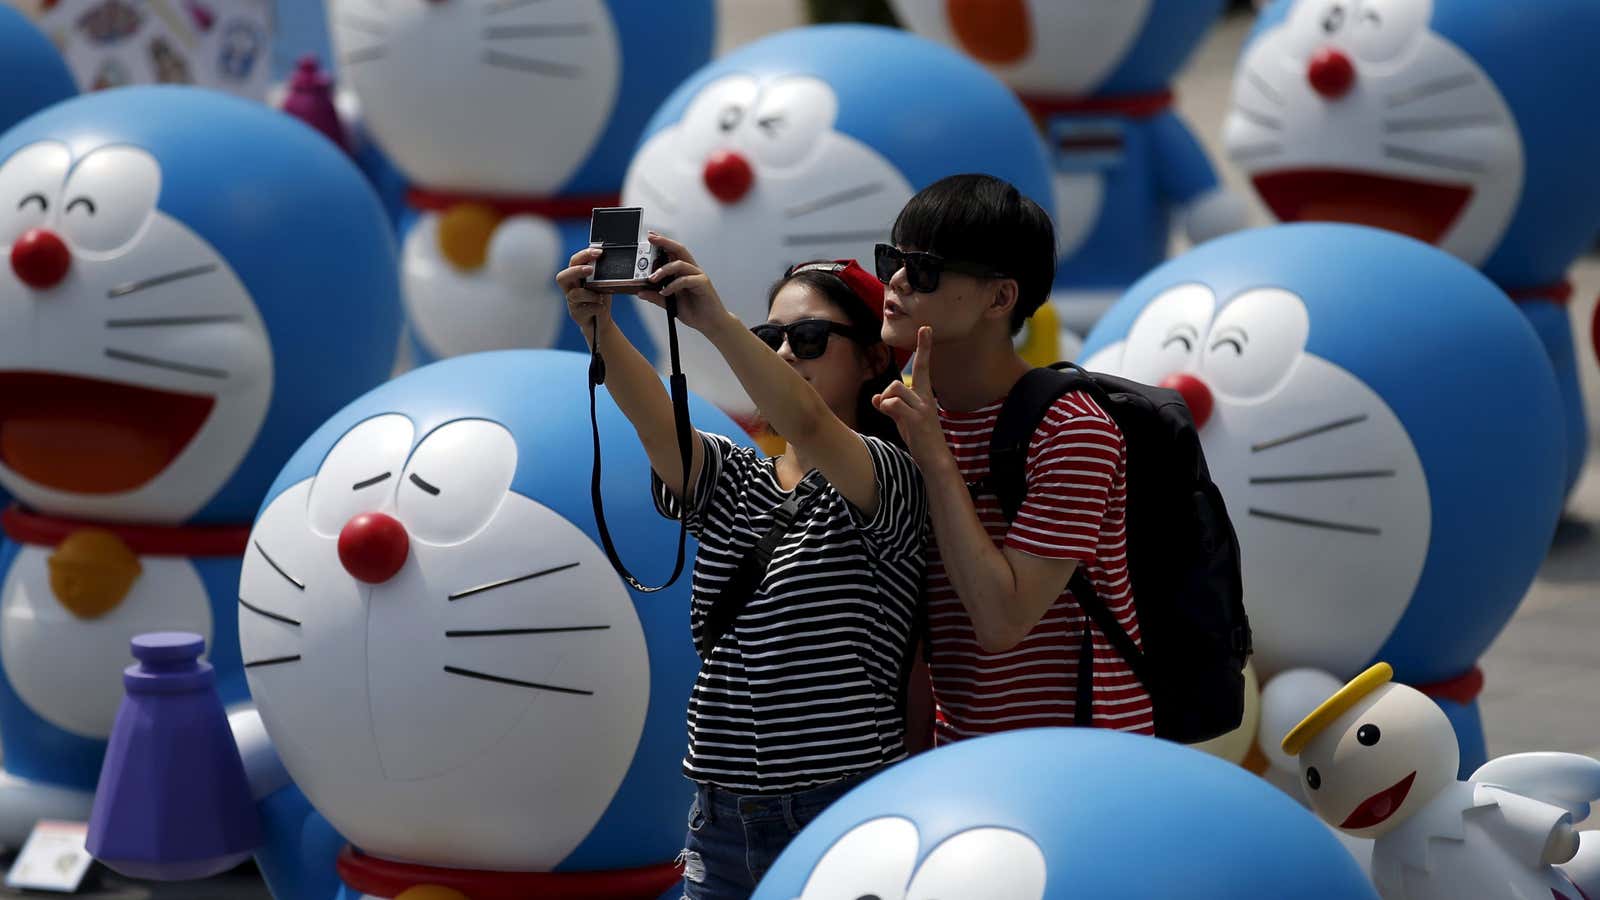 In South Korea, couple look is a fashionable way to tell the world that  you're in love